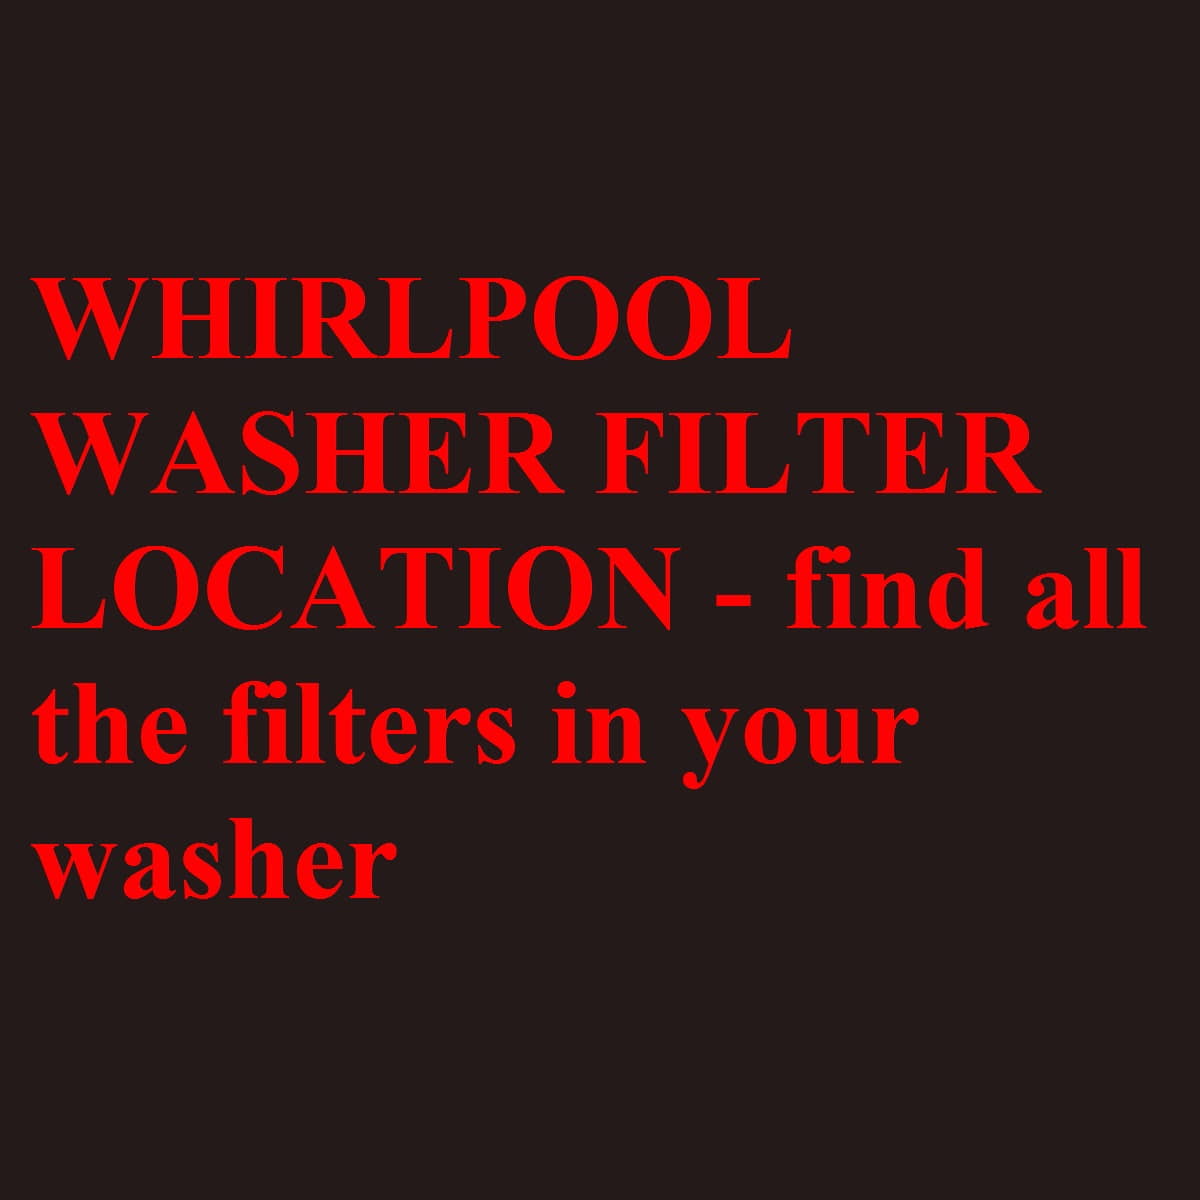 Whirlpool washer filter location